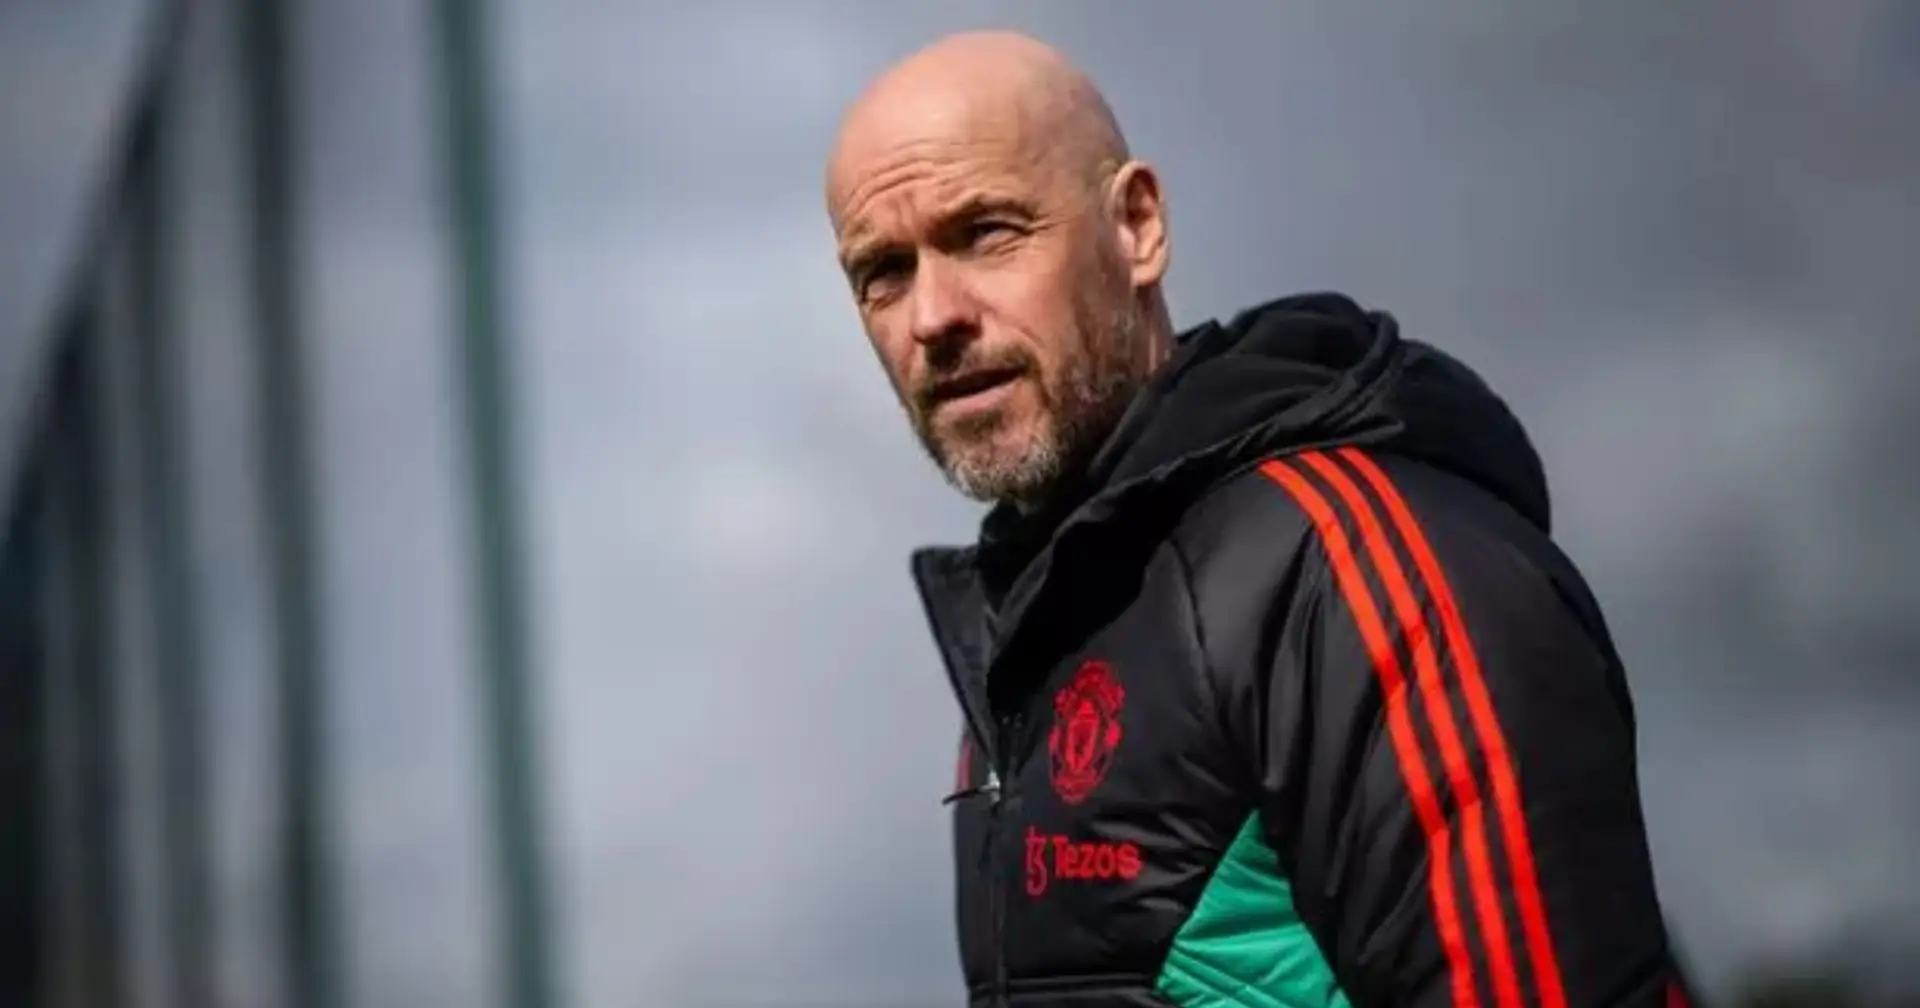 'You don't know the challanges until you're in it': Ten Hag asked if he regrets coming to Man United